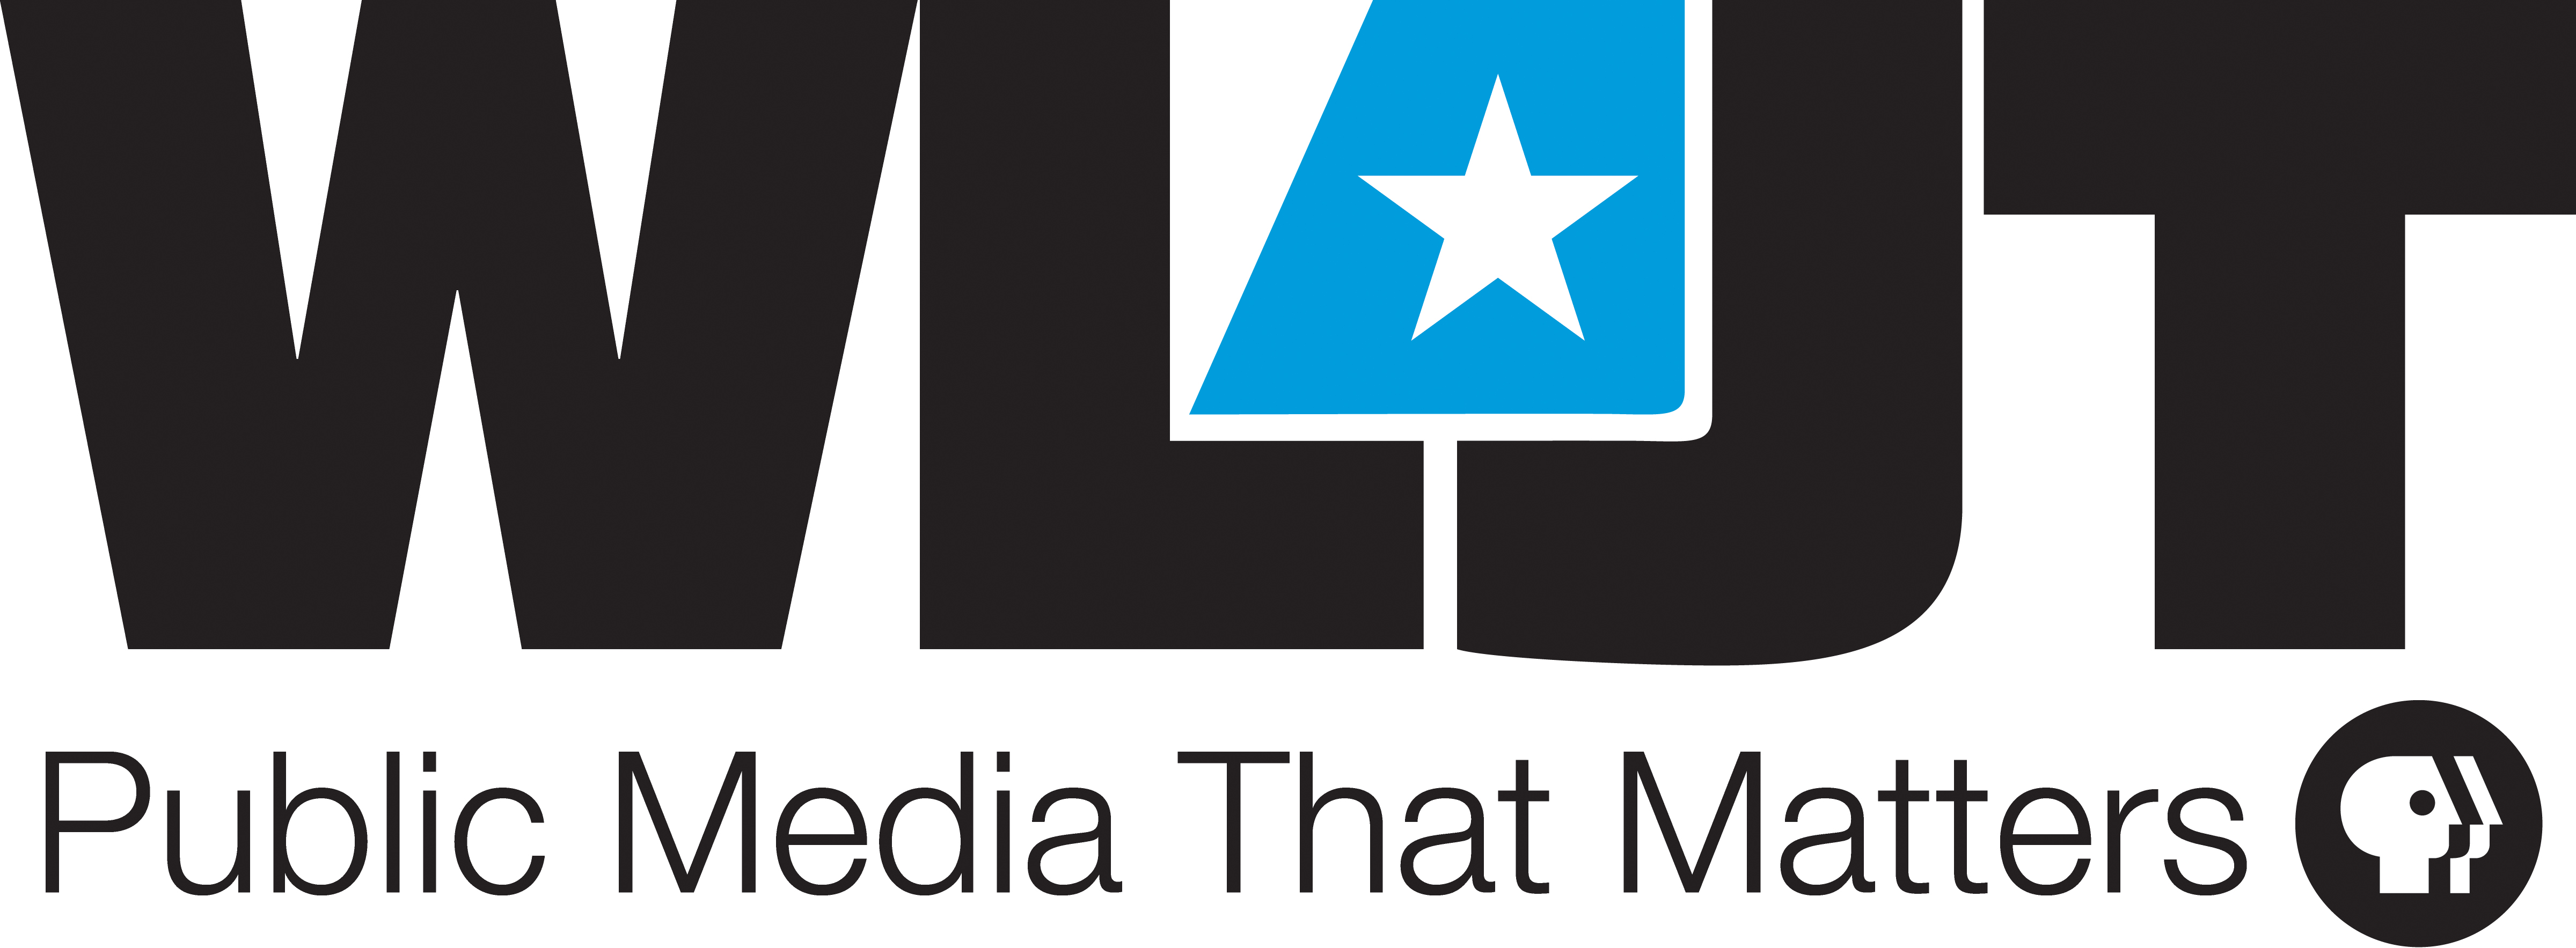 WLJT-DT, Public Television for West Tennessee logo